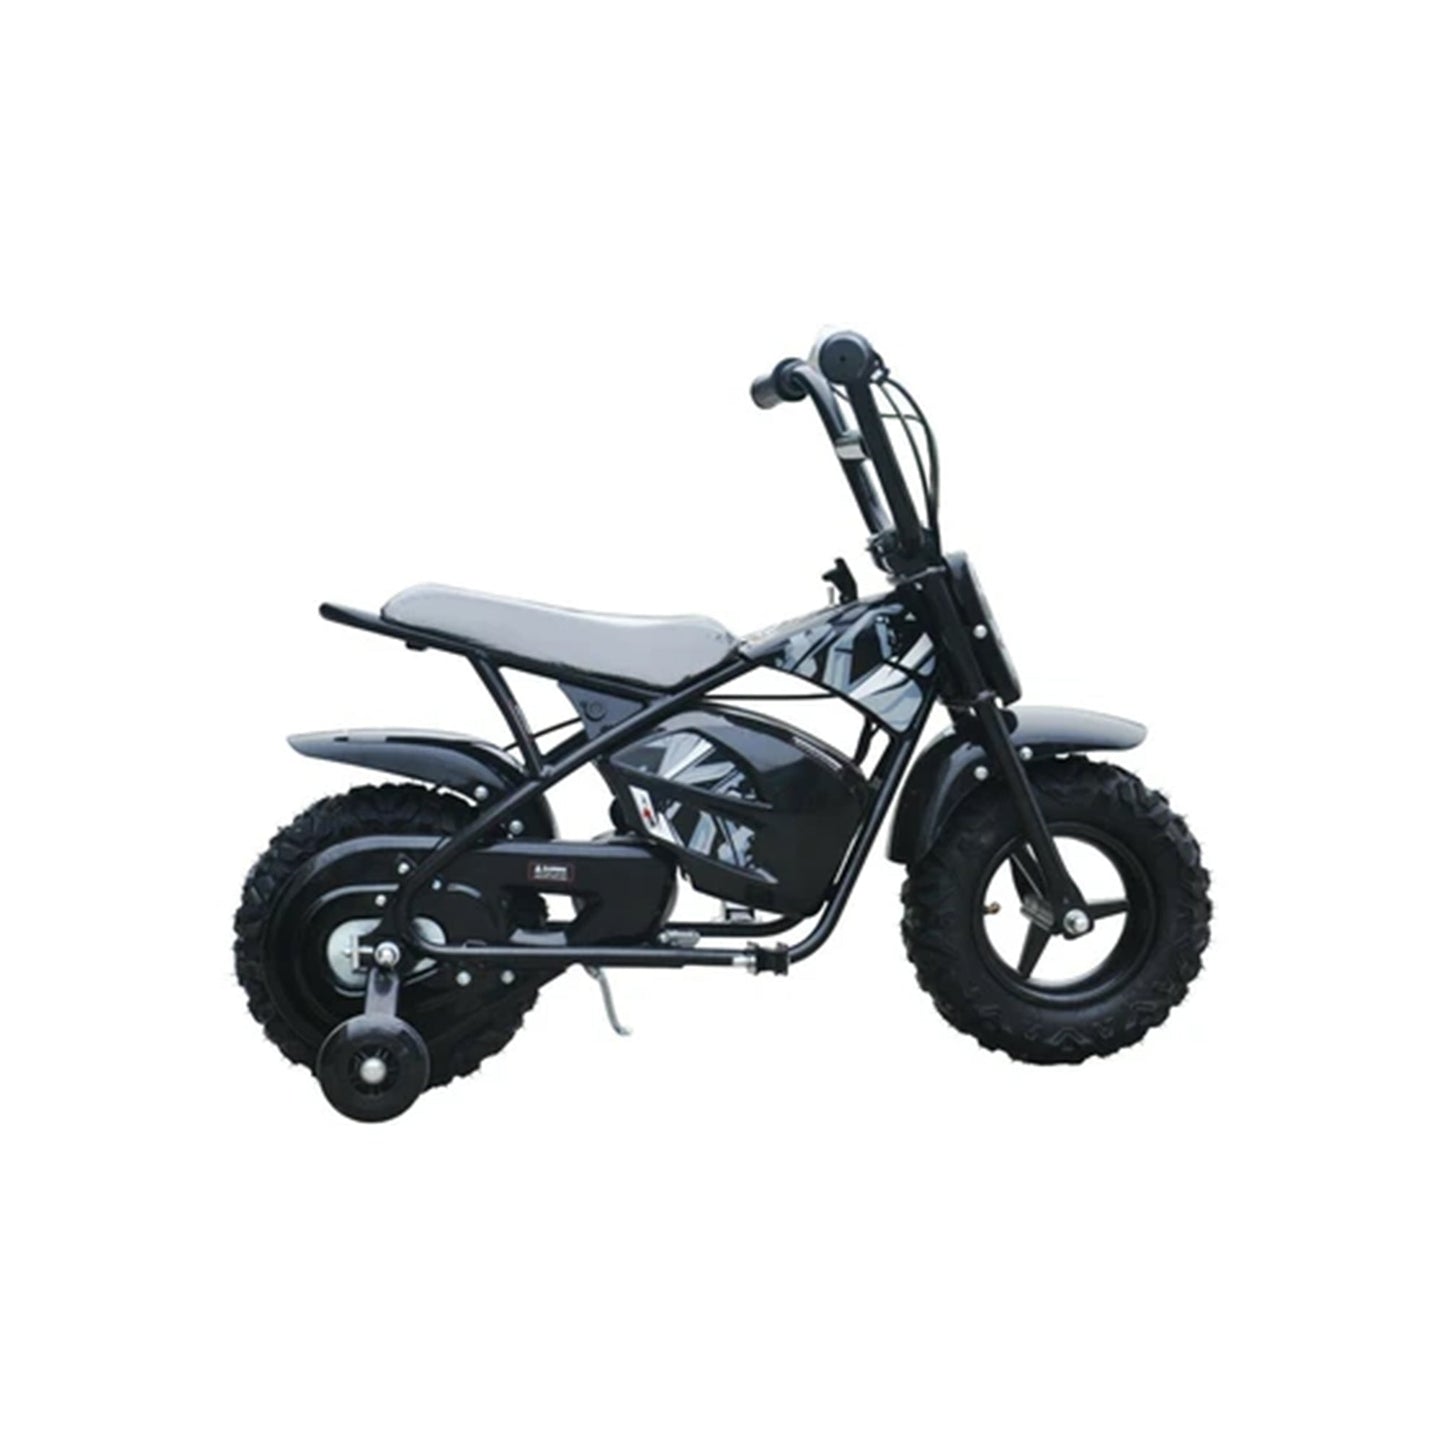 "Black and white Kids Electric Mini Dirtbike Scrambler 250 Watt 12 Volt with a twist and go throttle by Kids Dirt Bike brand on a white background."